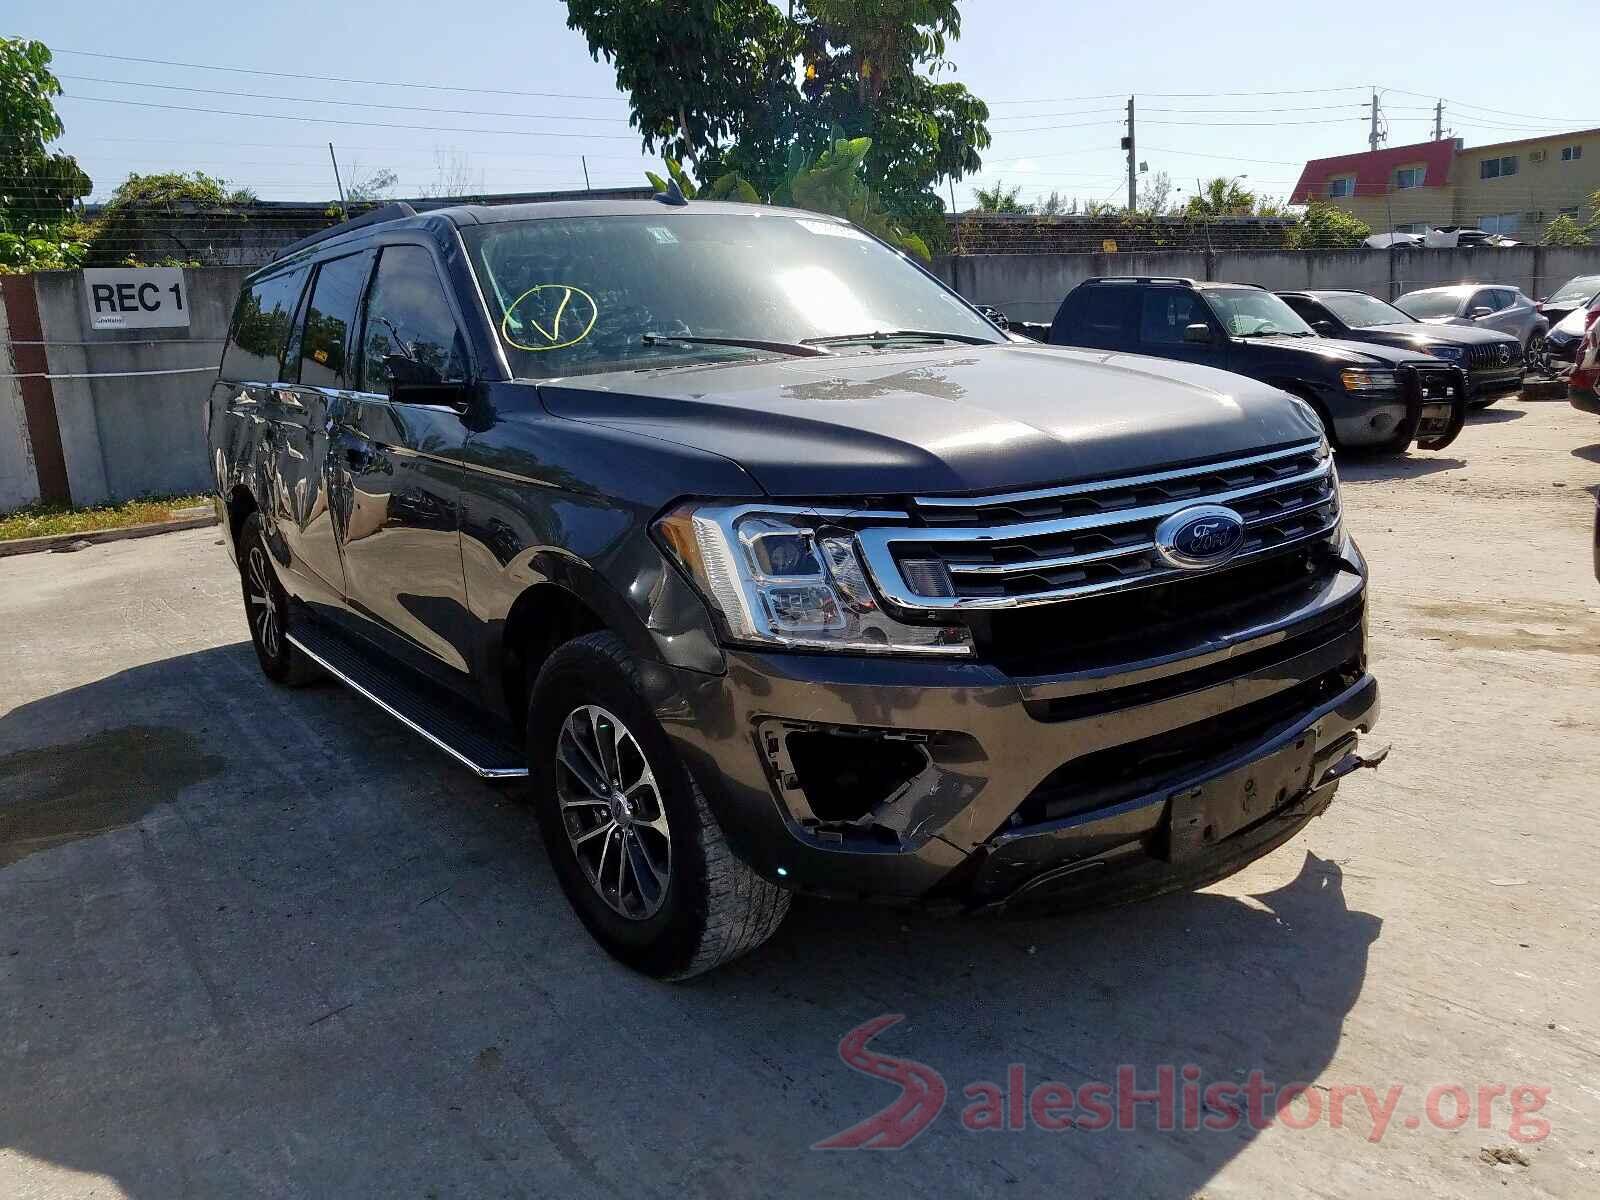 KNAFK4A63G5574276 2019 FORD EXPEDITION